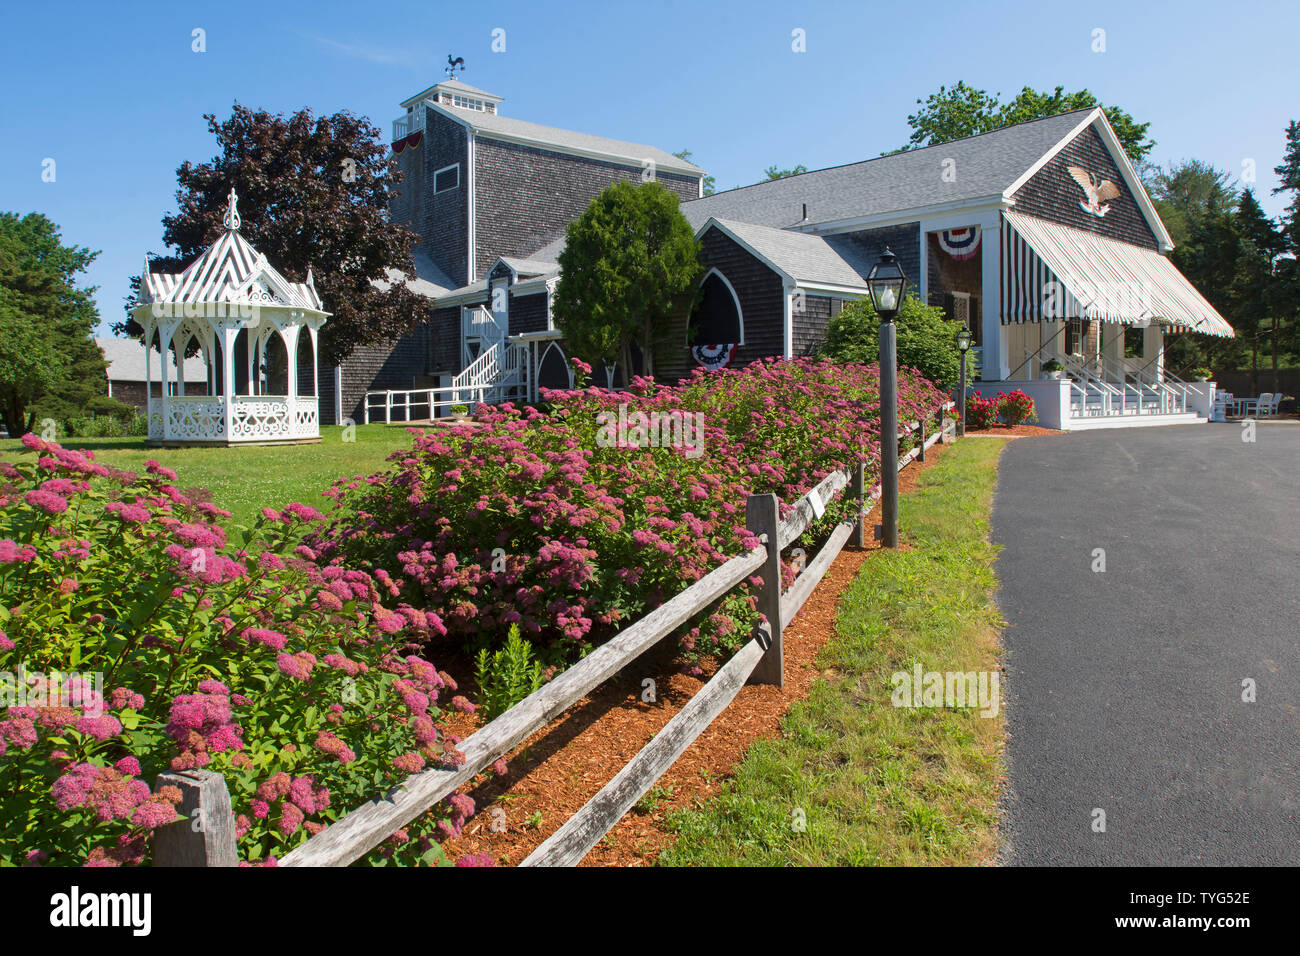 The Dennis Playhouse.  An historic summer theater on Cape Cod, USA Stock Photo